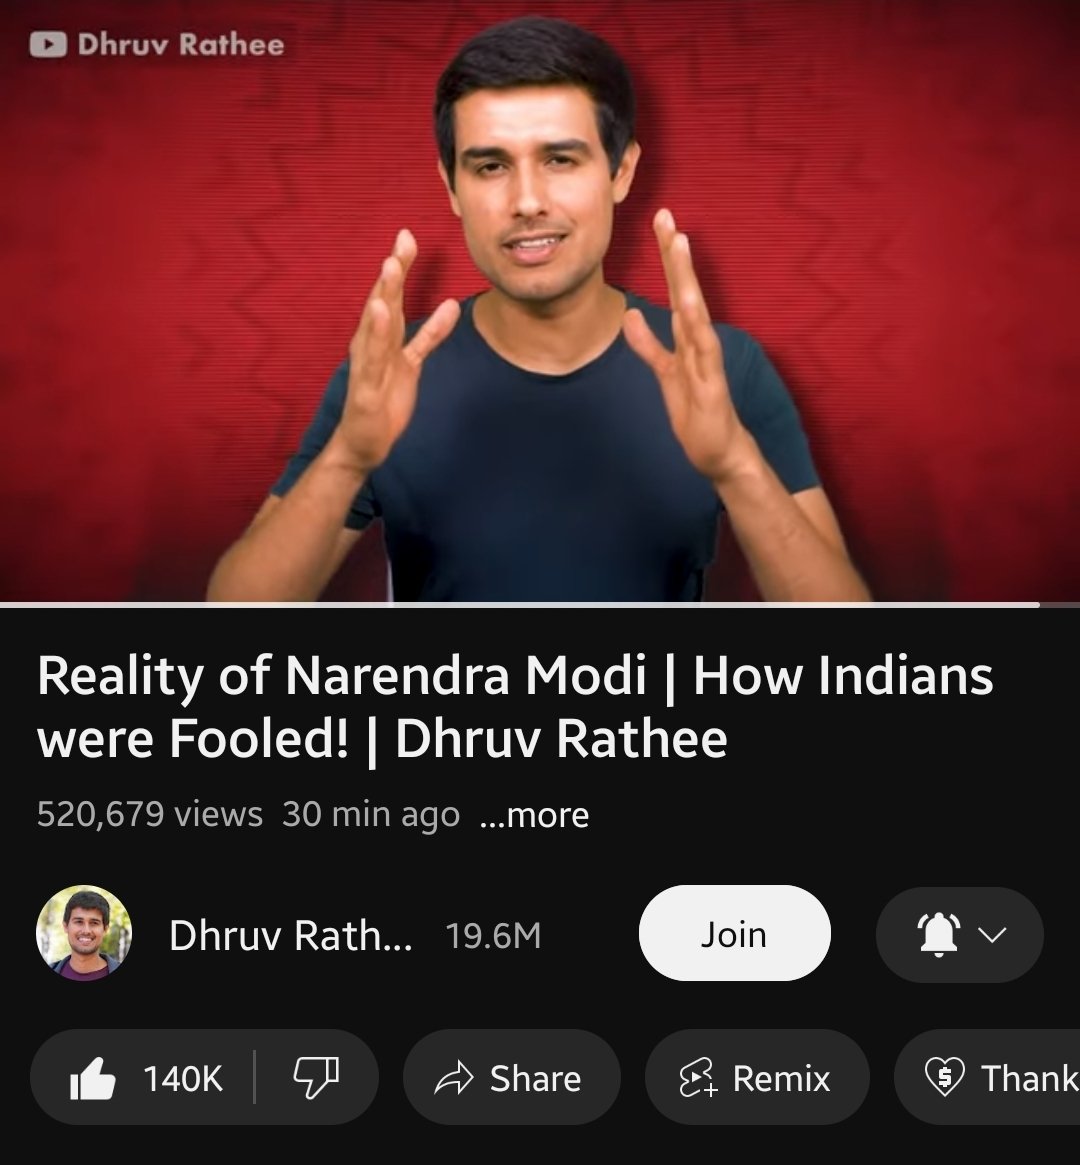 He is just killing 
He exposed modi/andhbhakt
#DhruvRathee #mission100crore